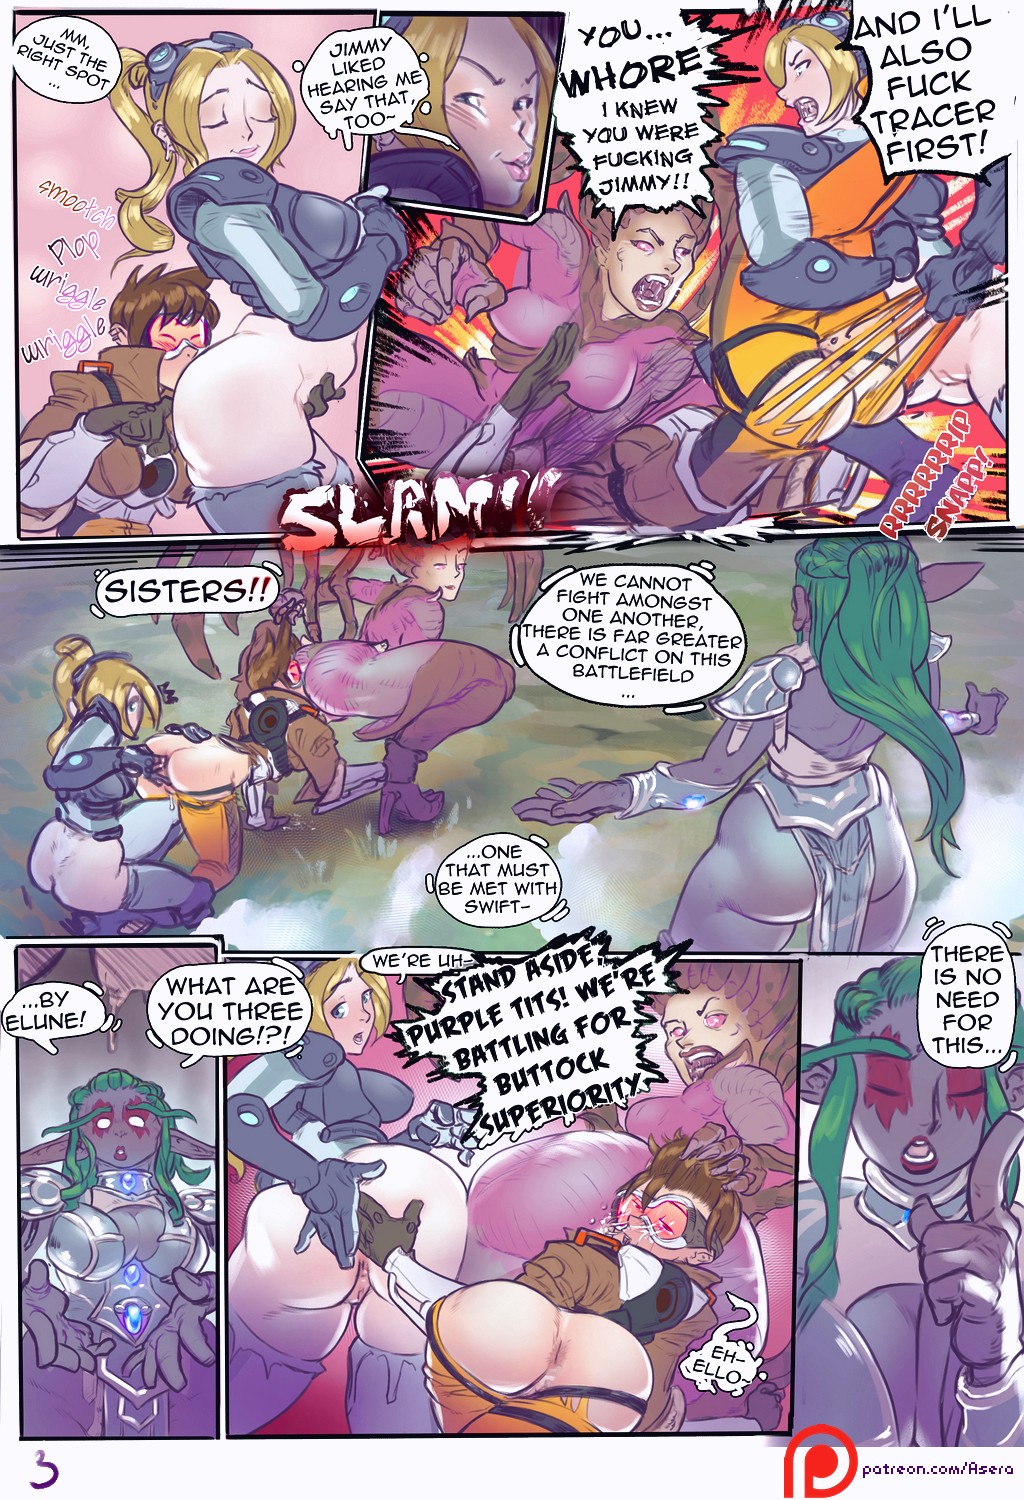 Booties of the Storm porn comic page 003